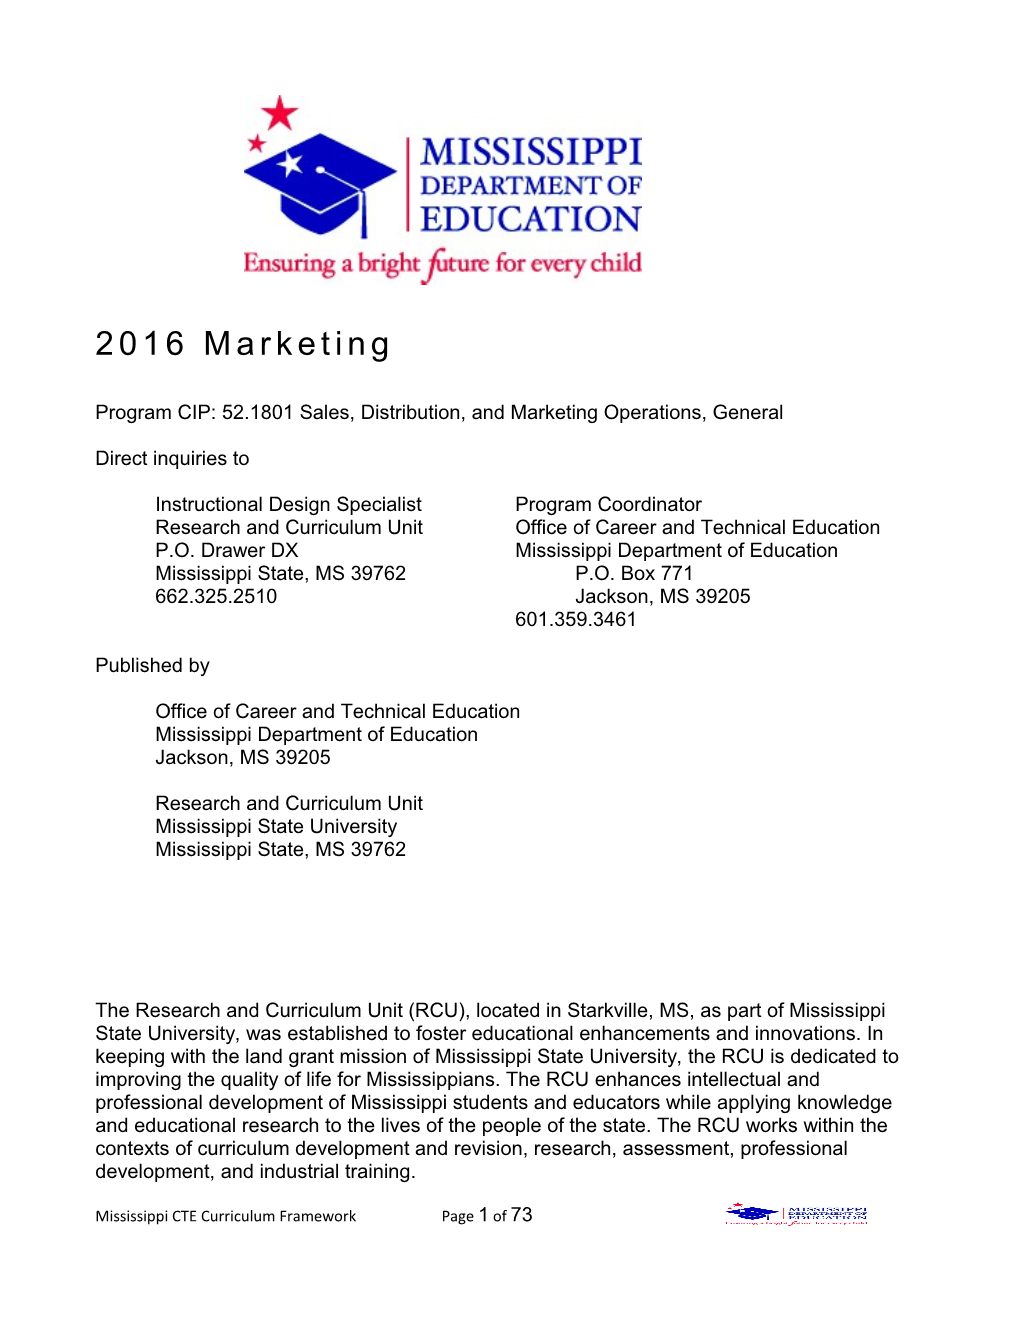 Program CIP: 52.1801 Sales, Distribution, and Marketing Operations, General